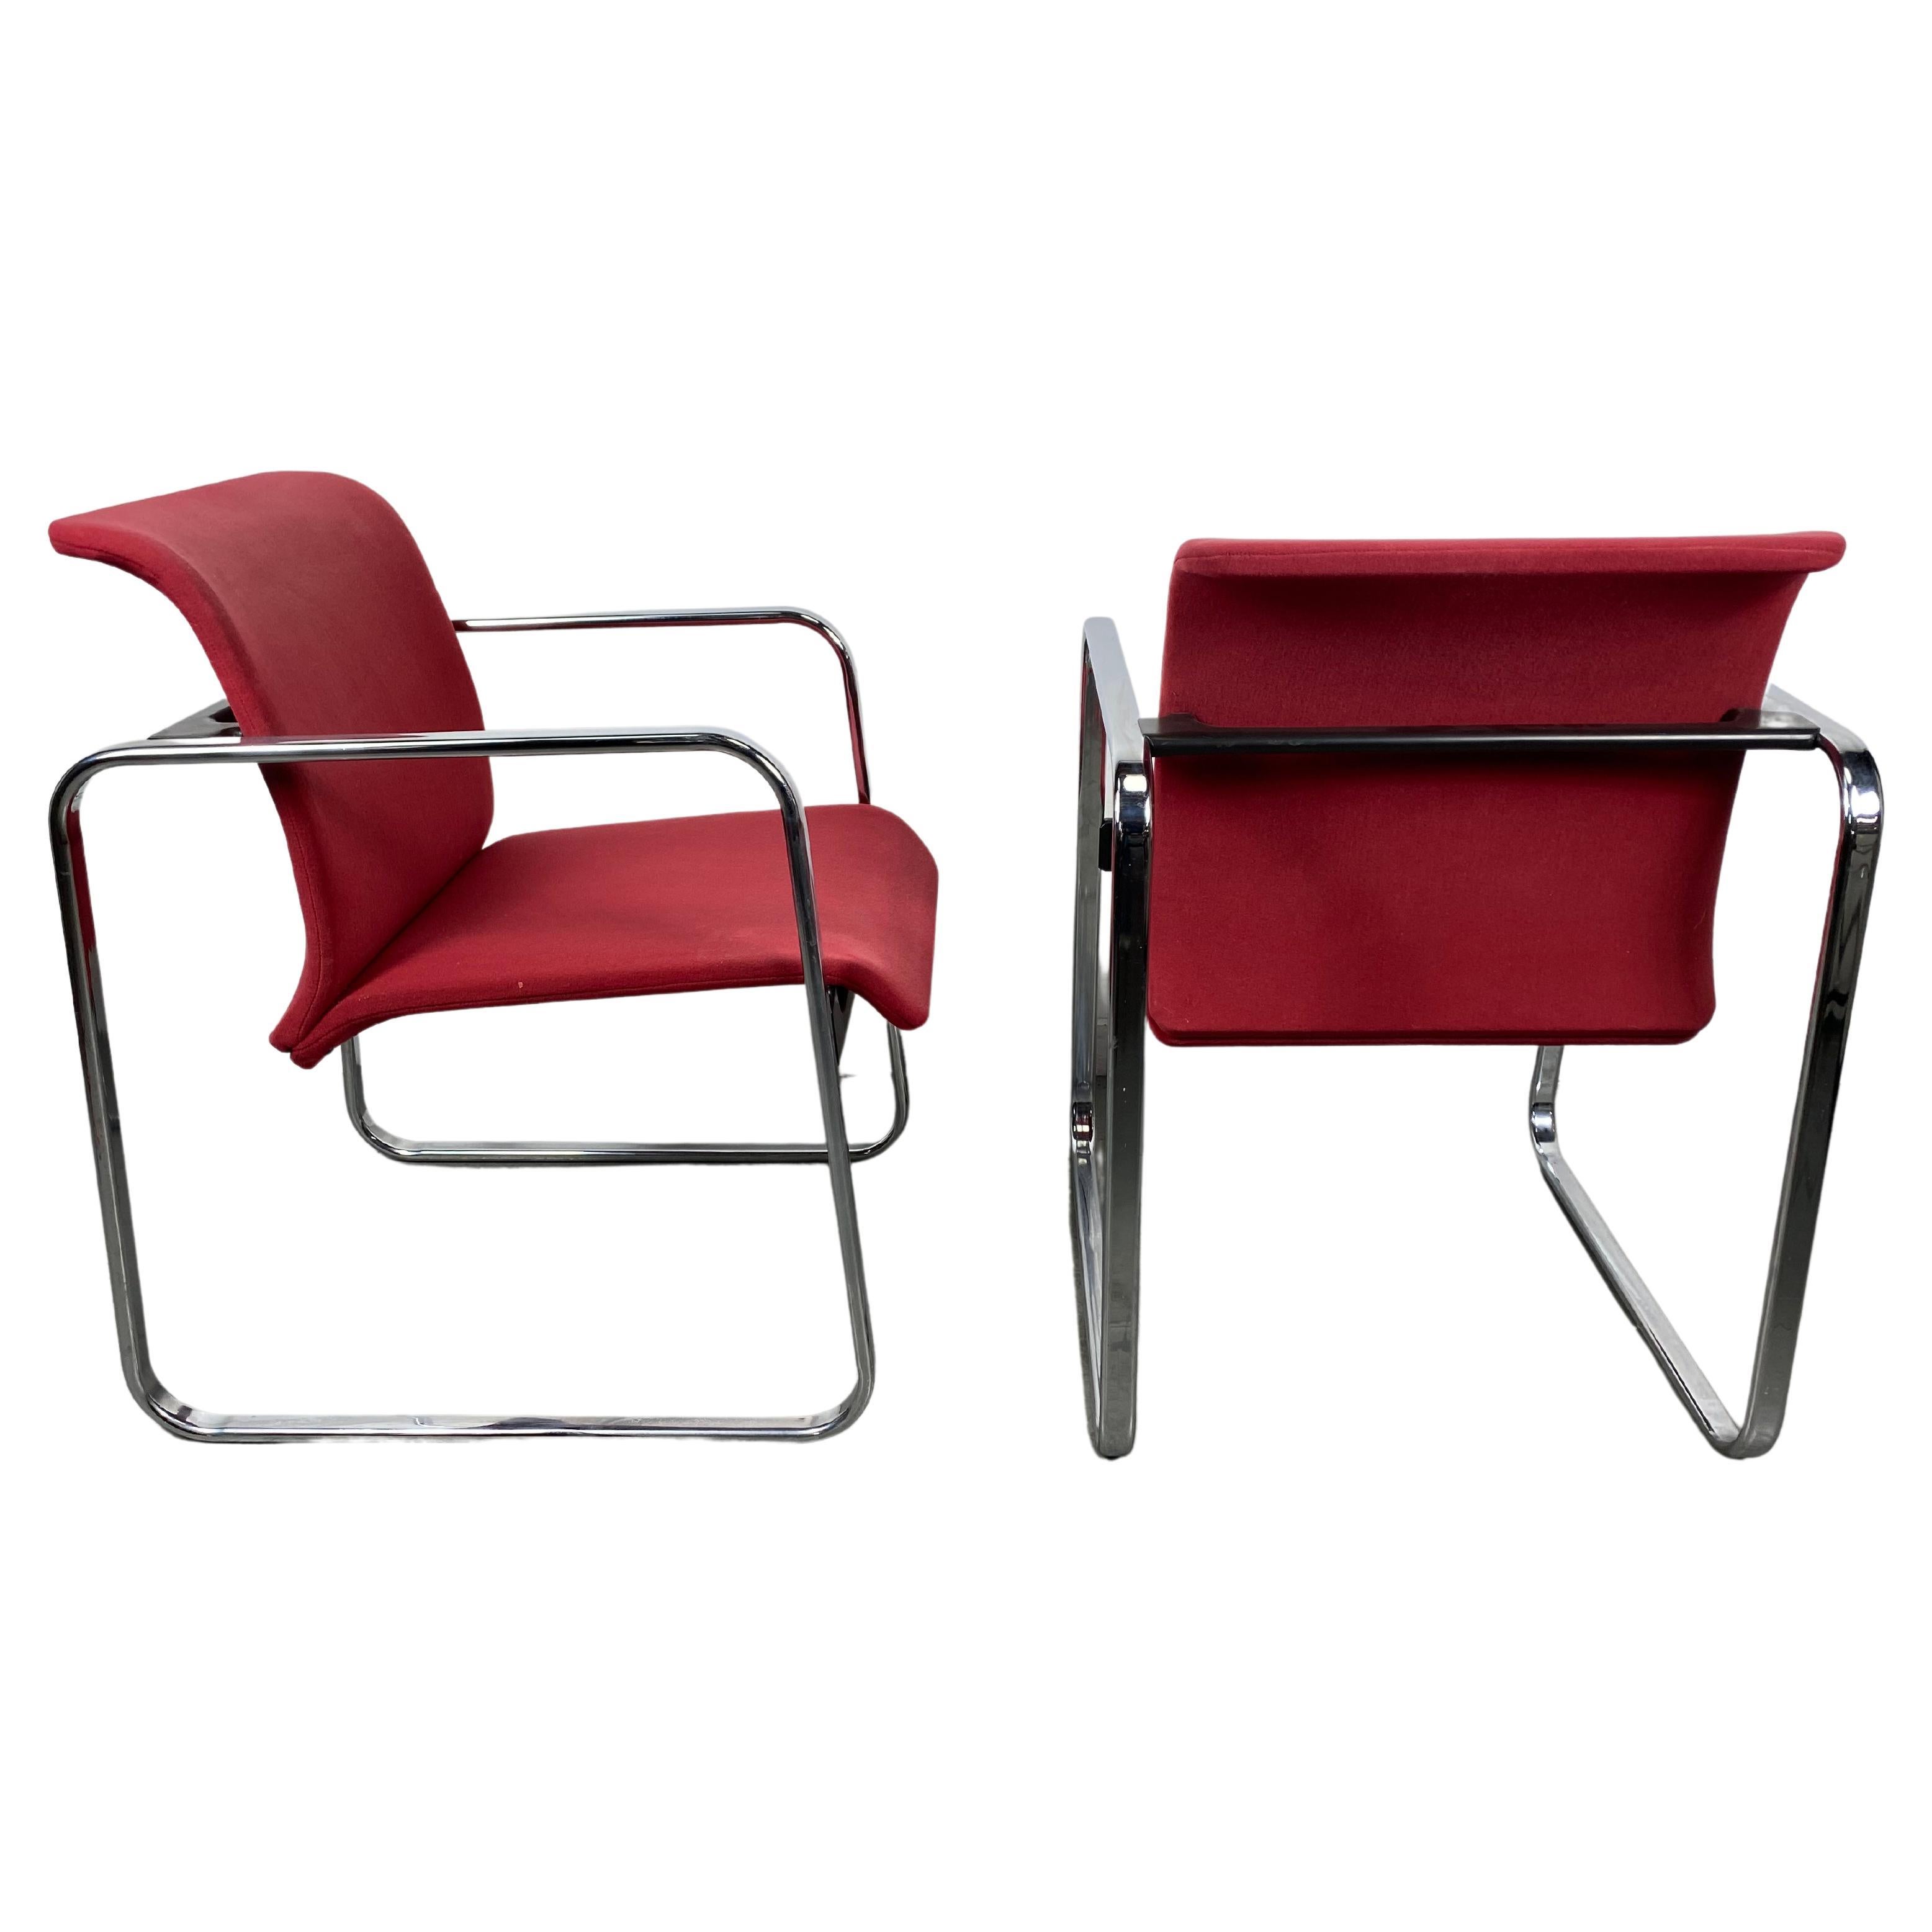 Modernist Fabric & Chrome Tubular Chairs by Peter Protzman for Herman Miller For Sale